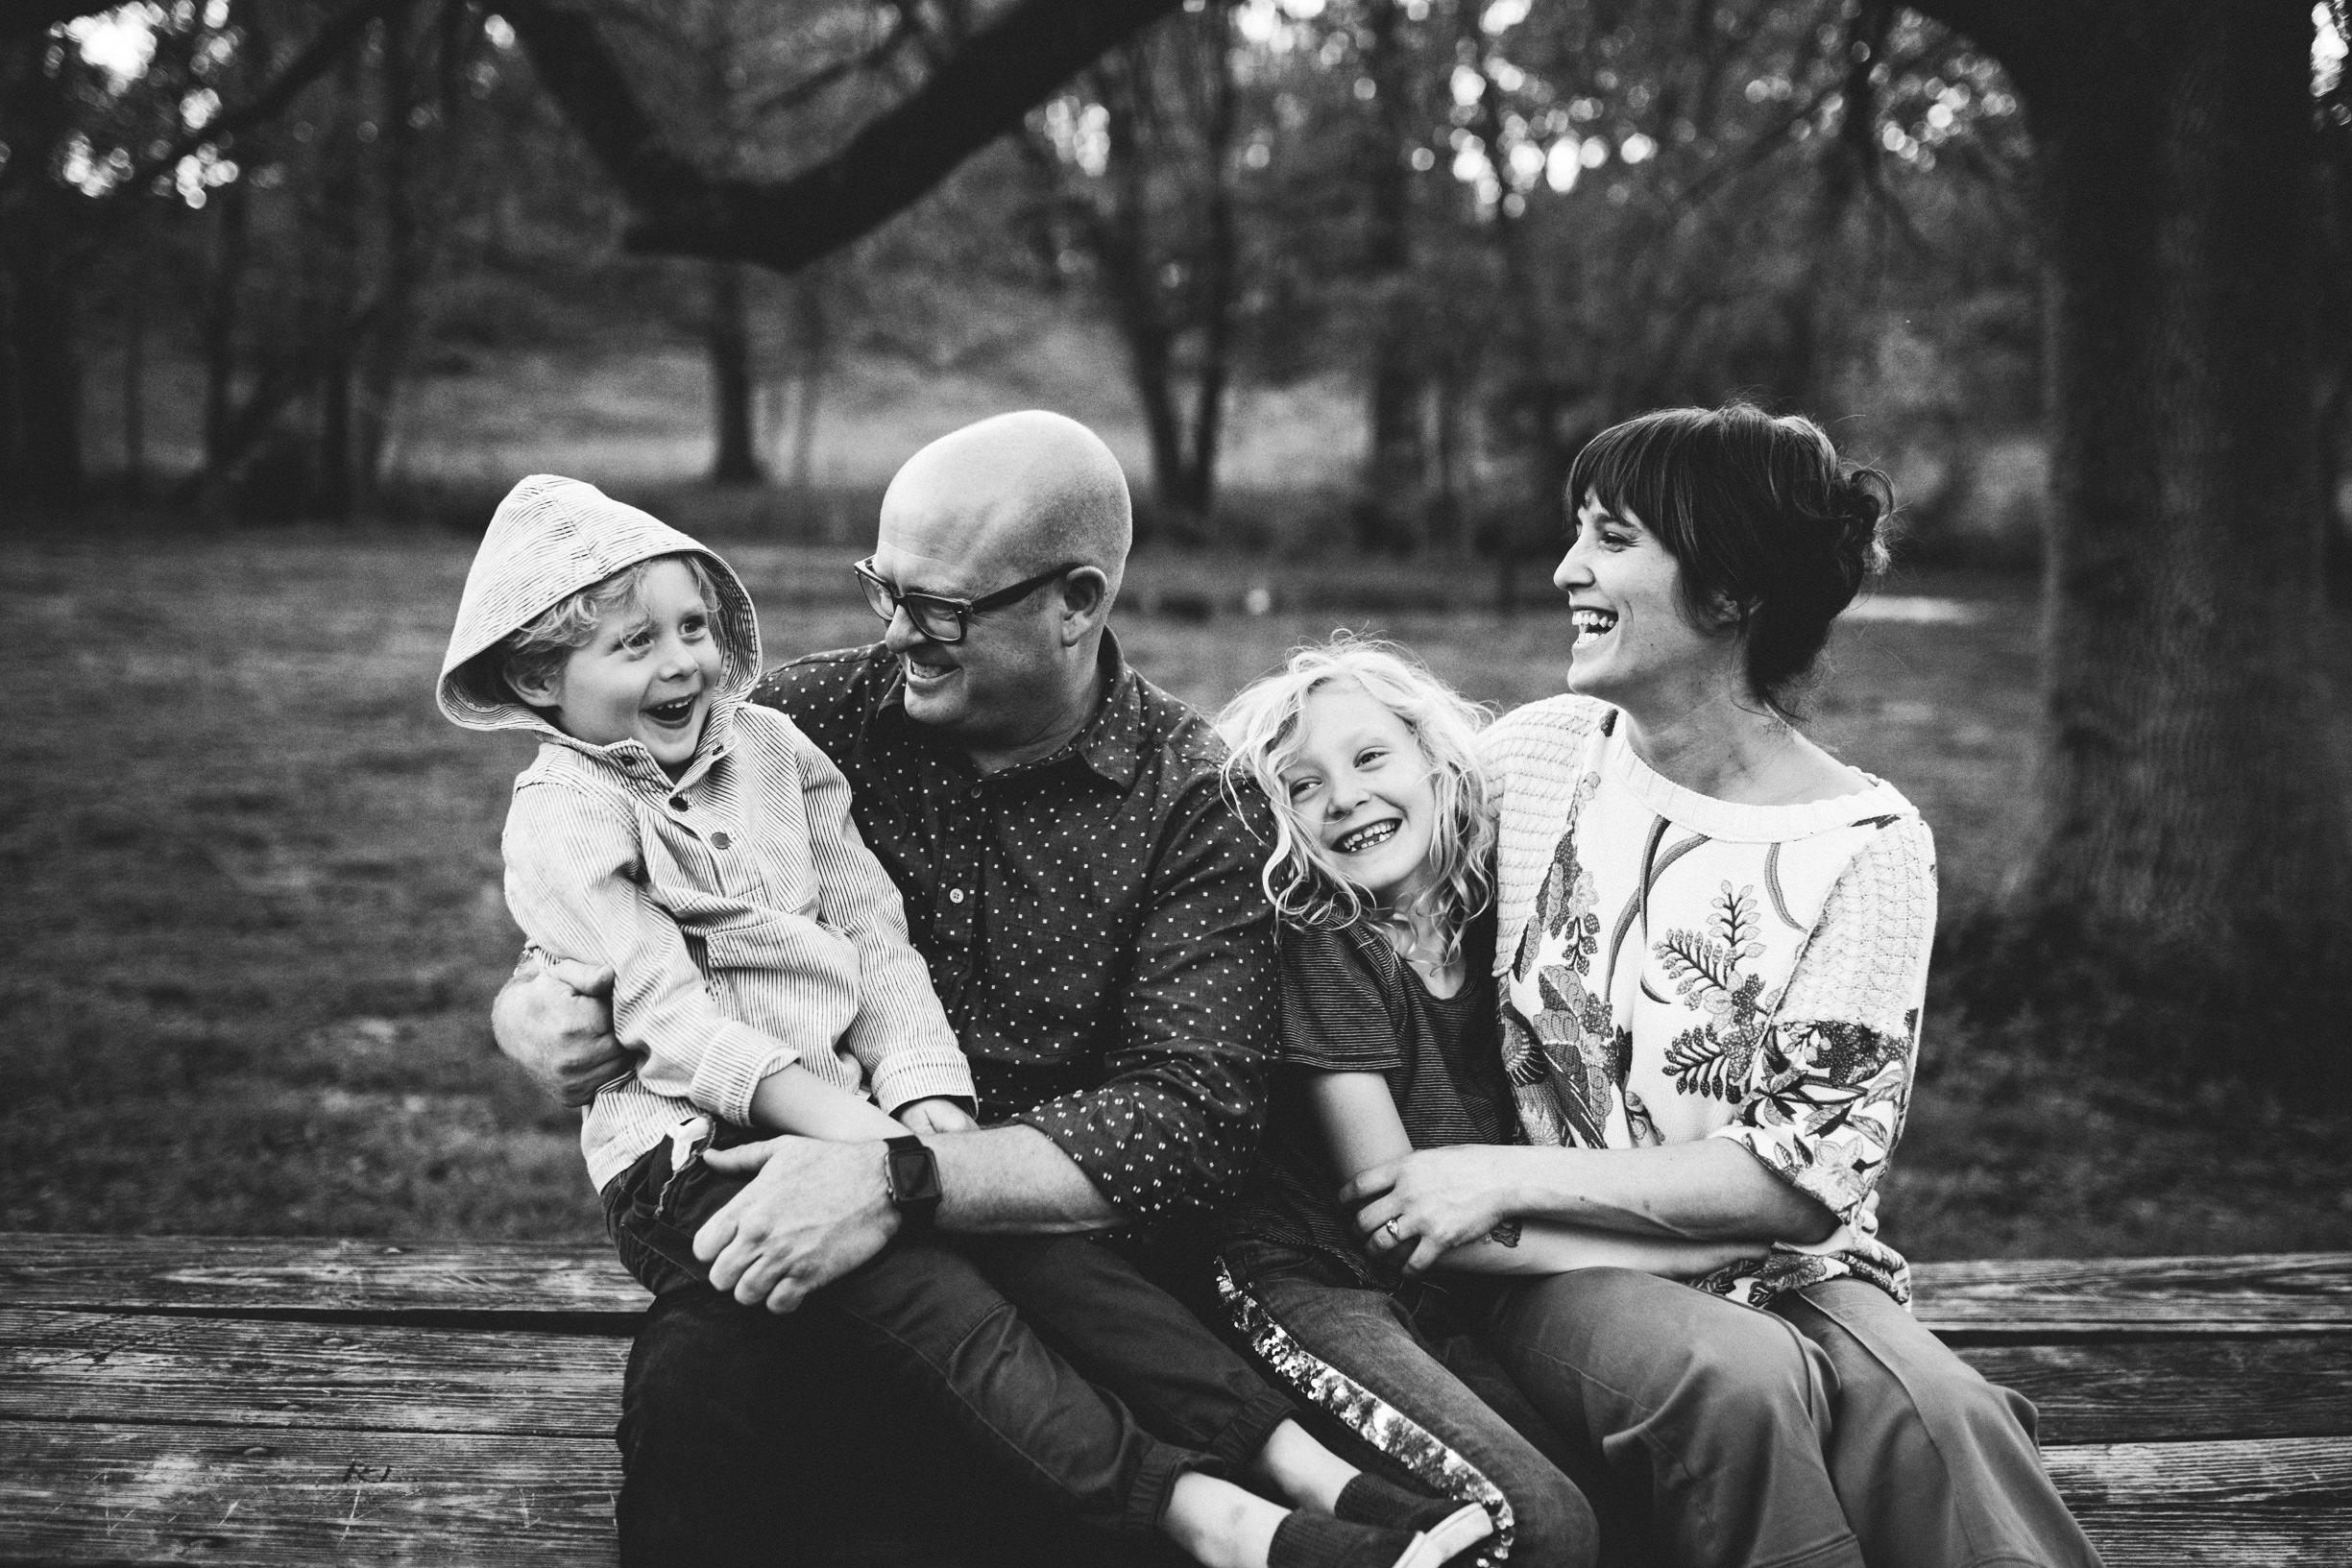 louisville-family-photographer-crystal-ludwick-photo (30 of 46).jpg